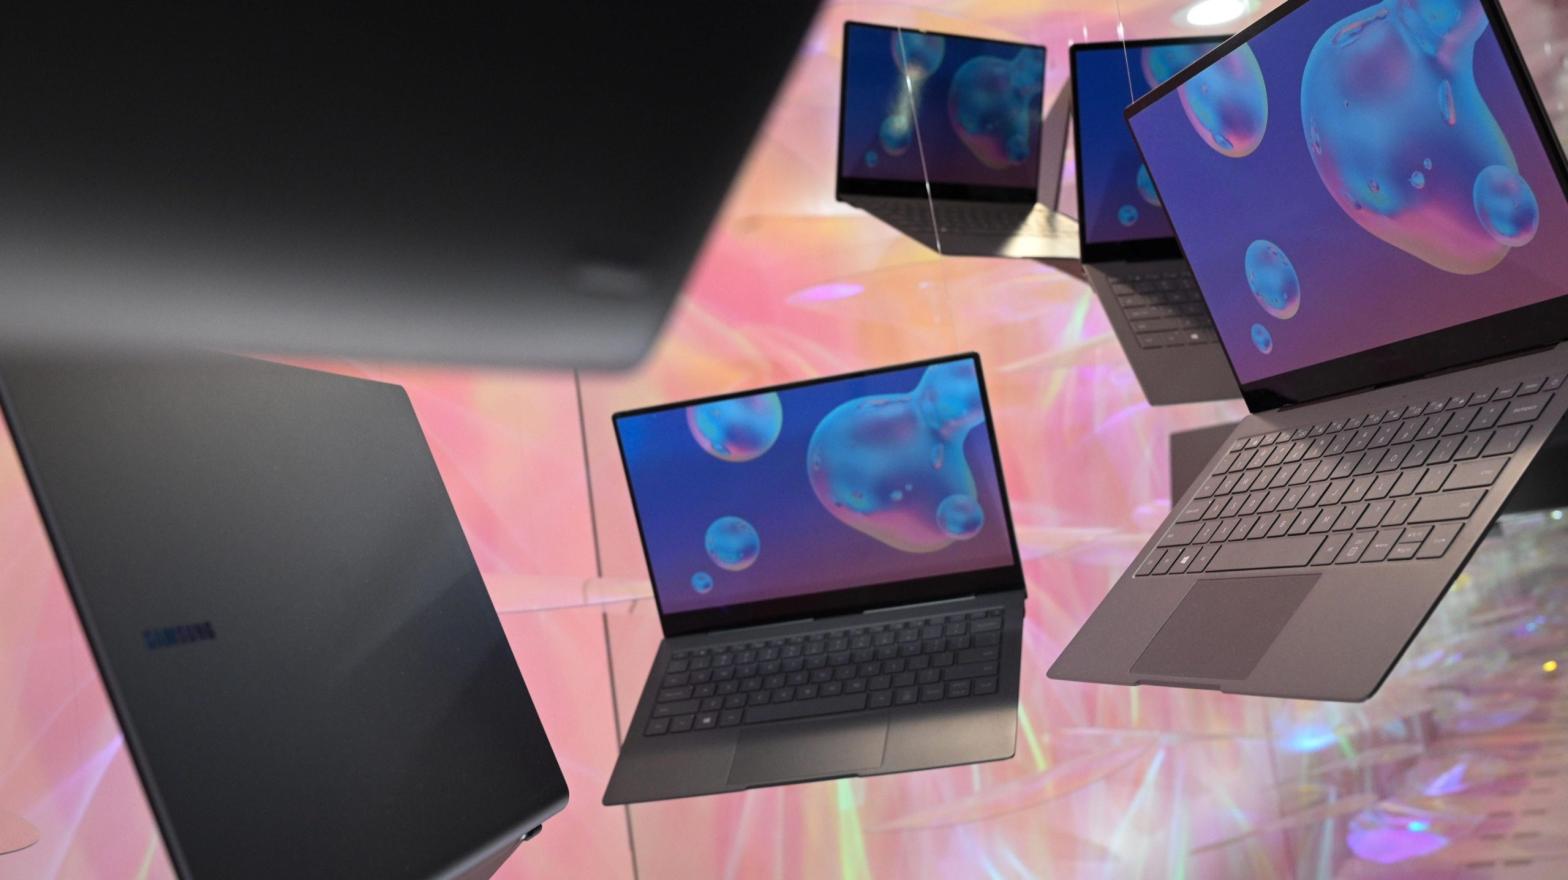 A display of Samsung Galaxy Book S laptop computers is seen January 10, 2020 on the final day of the 2020 Consumer Electronics Show (CES) in Las Vegas, Nevada.  (Photo: Robyn Beck / AFP, Getty Images)